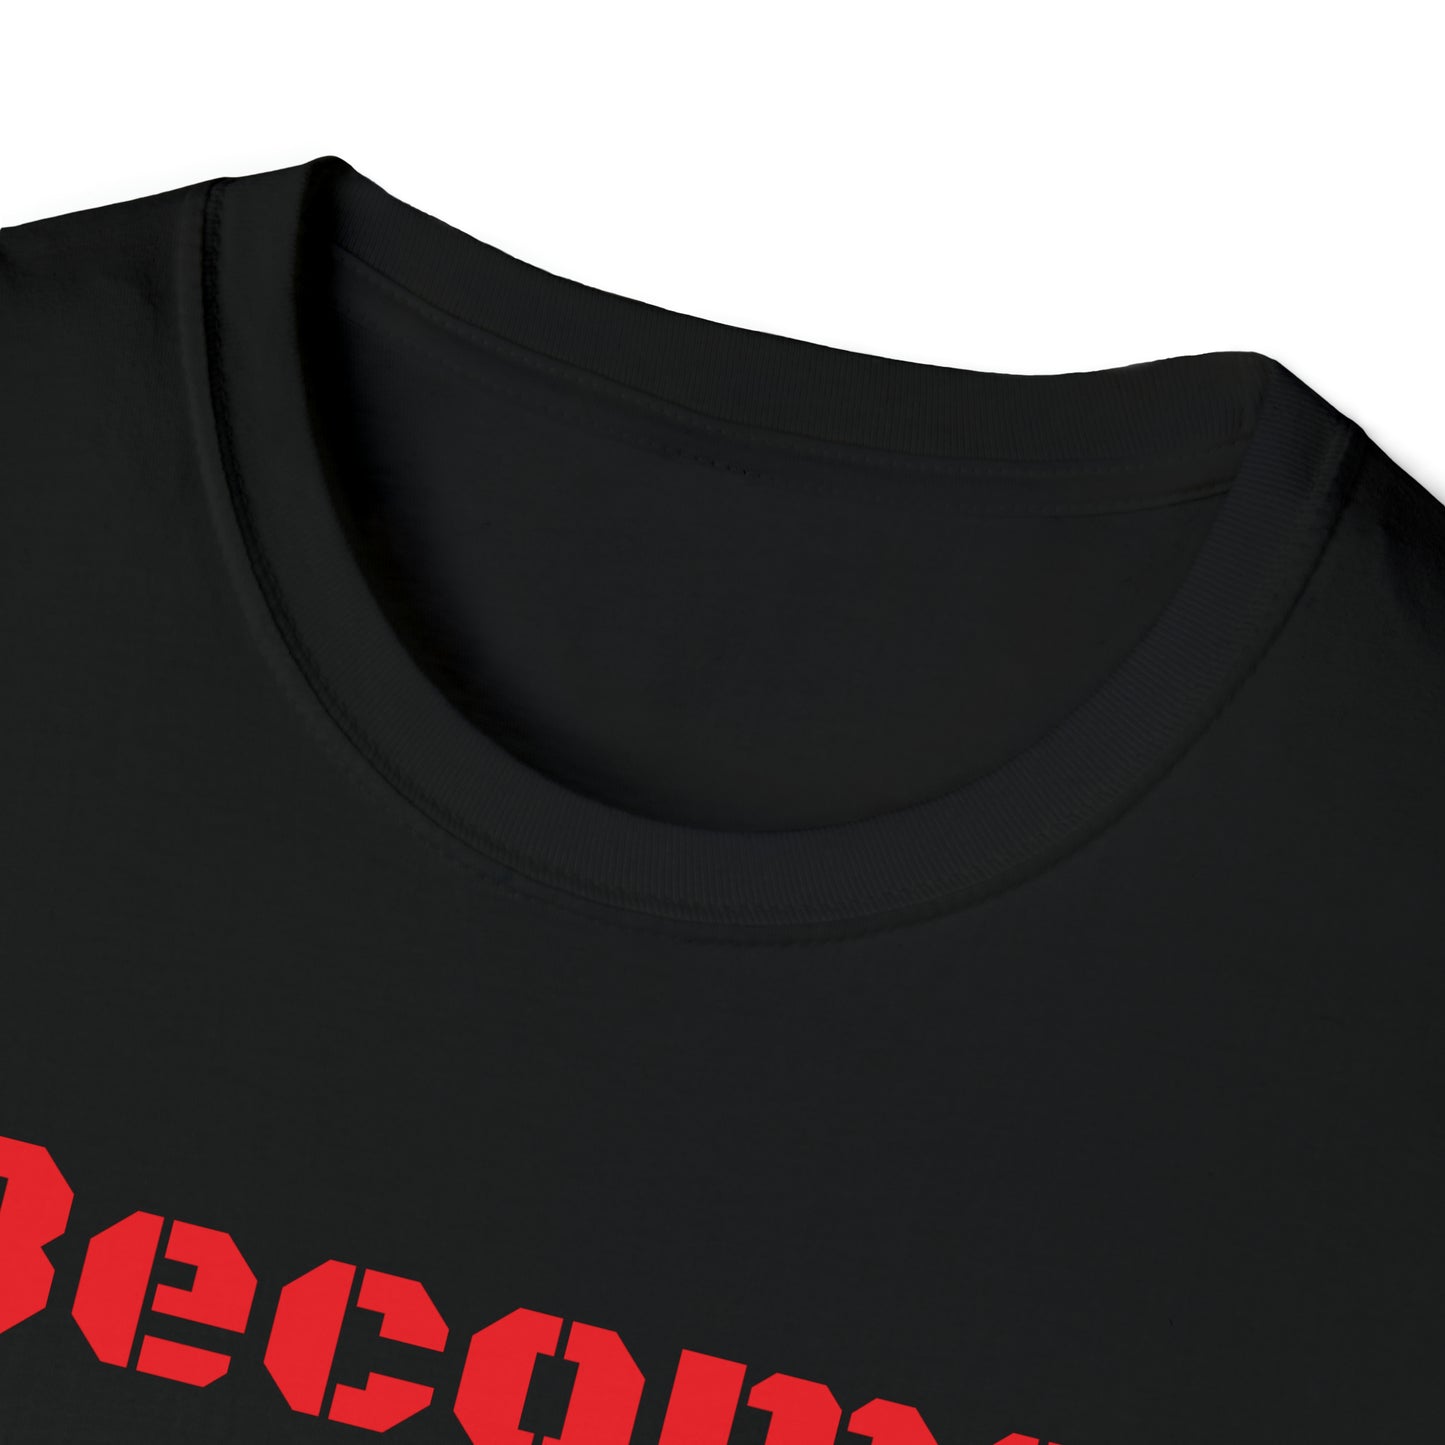 Become Stronger Unisex Softstyle T-Shirt